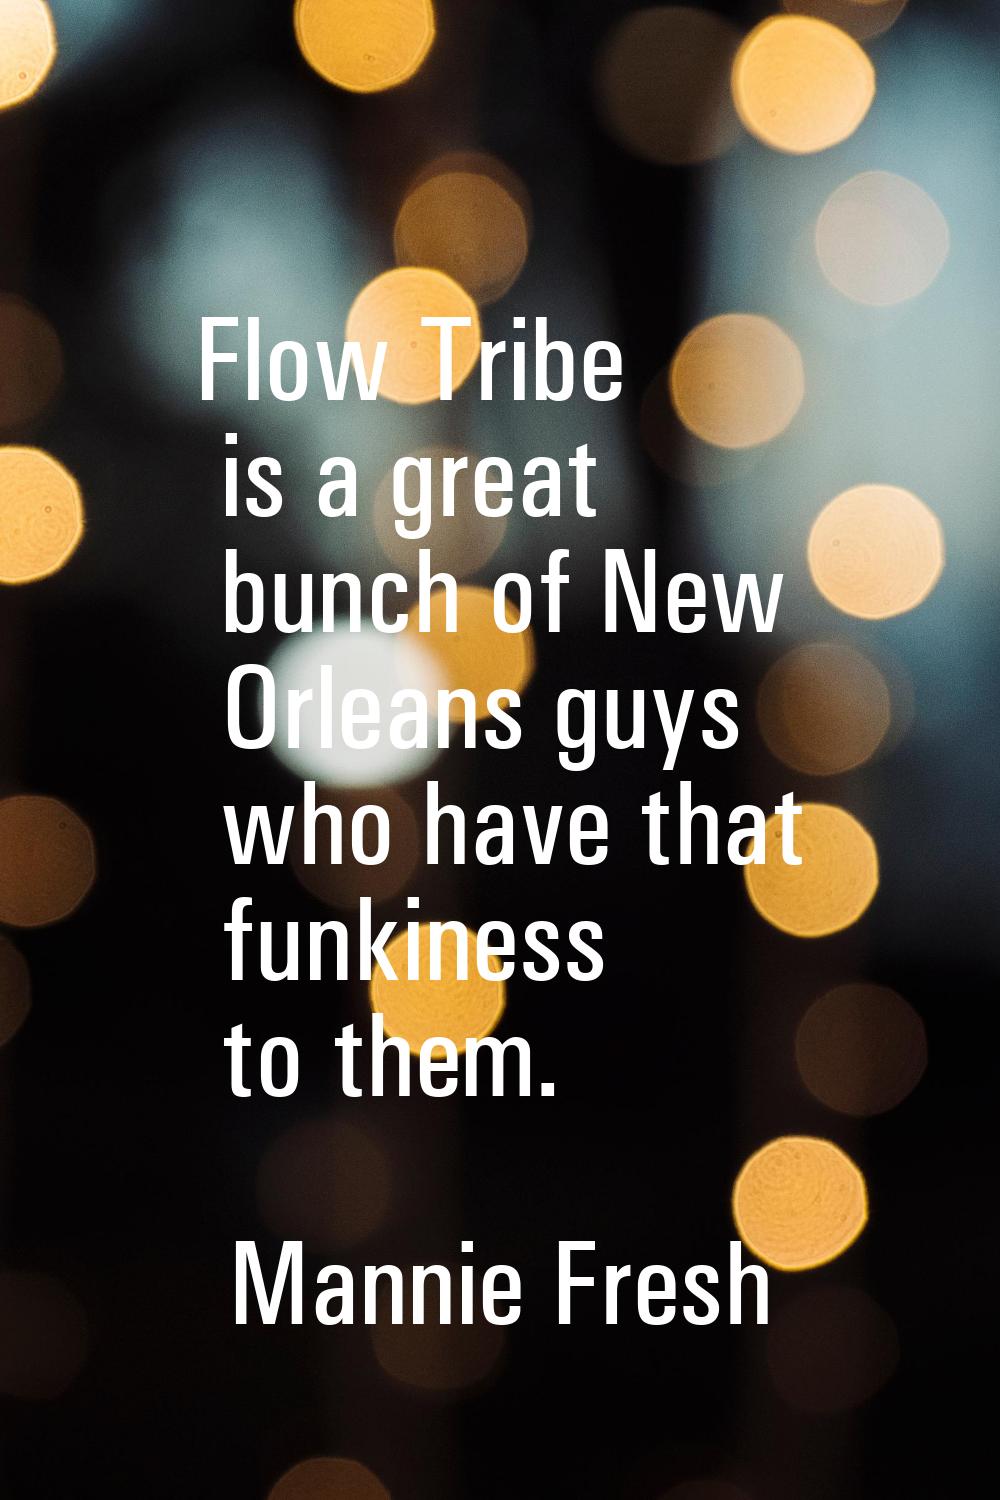 Flow Tribe is a great bunch of New Orleans guys who have that funkiness to them.